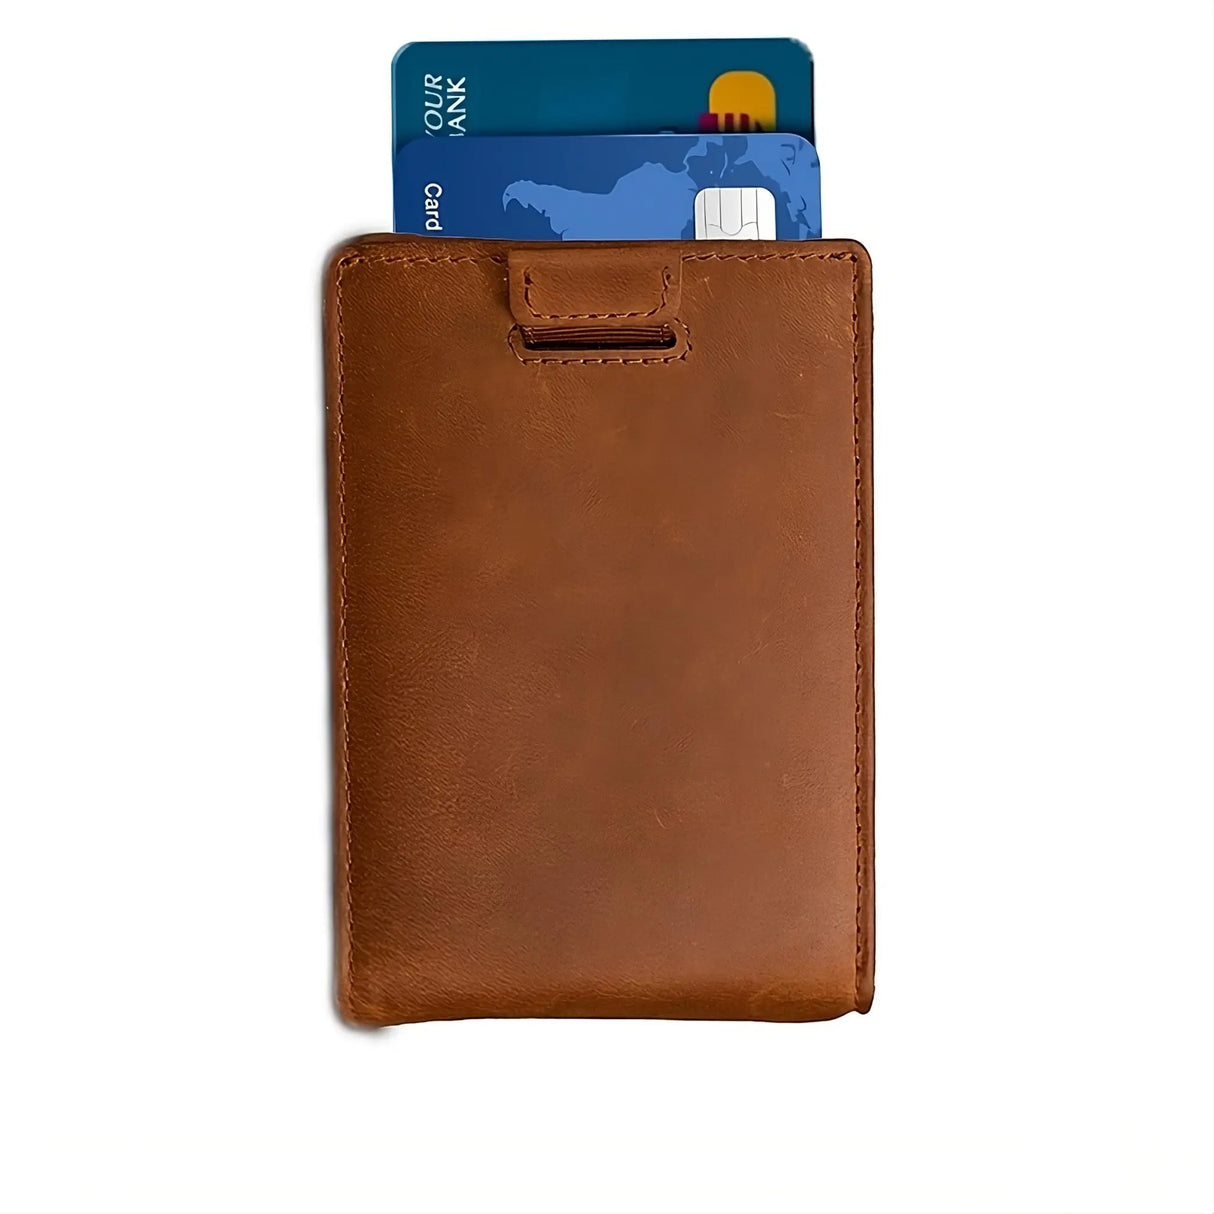 Mens Wallet with Quick Access Pull Out Tab - AirTag Wallet